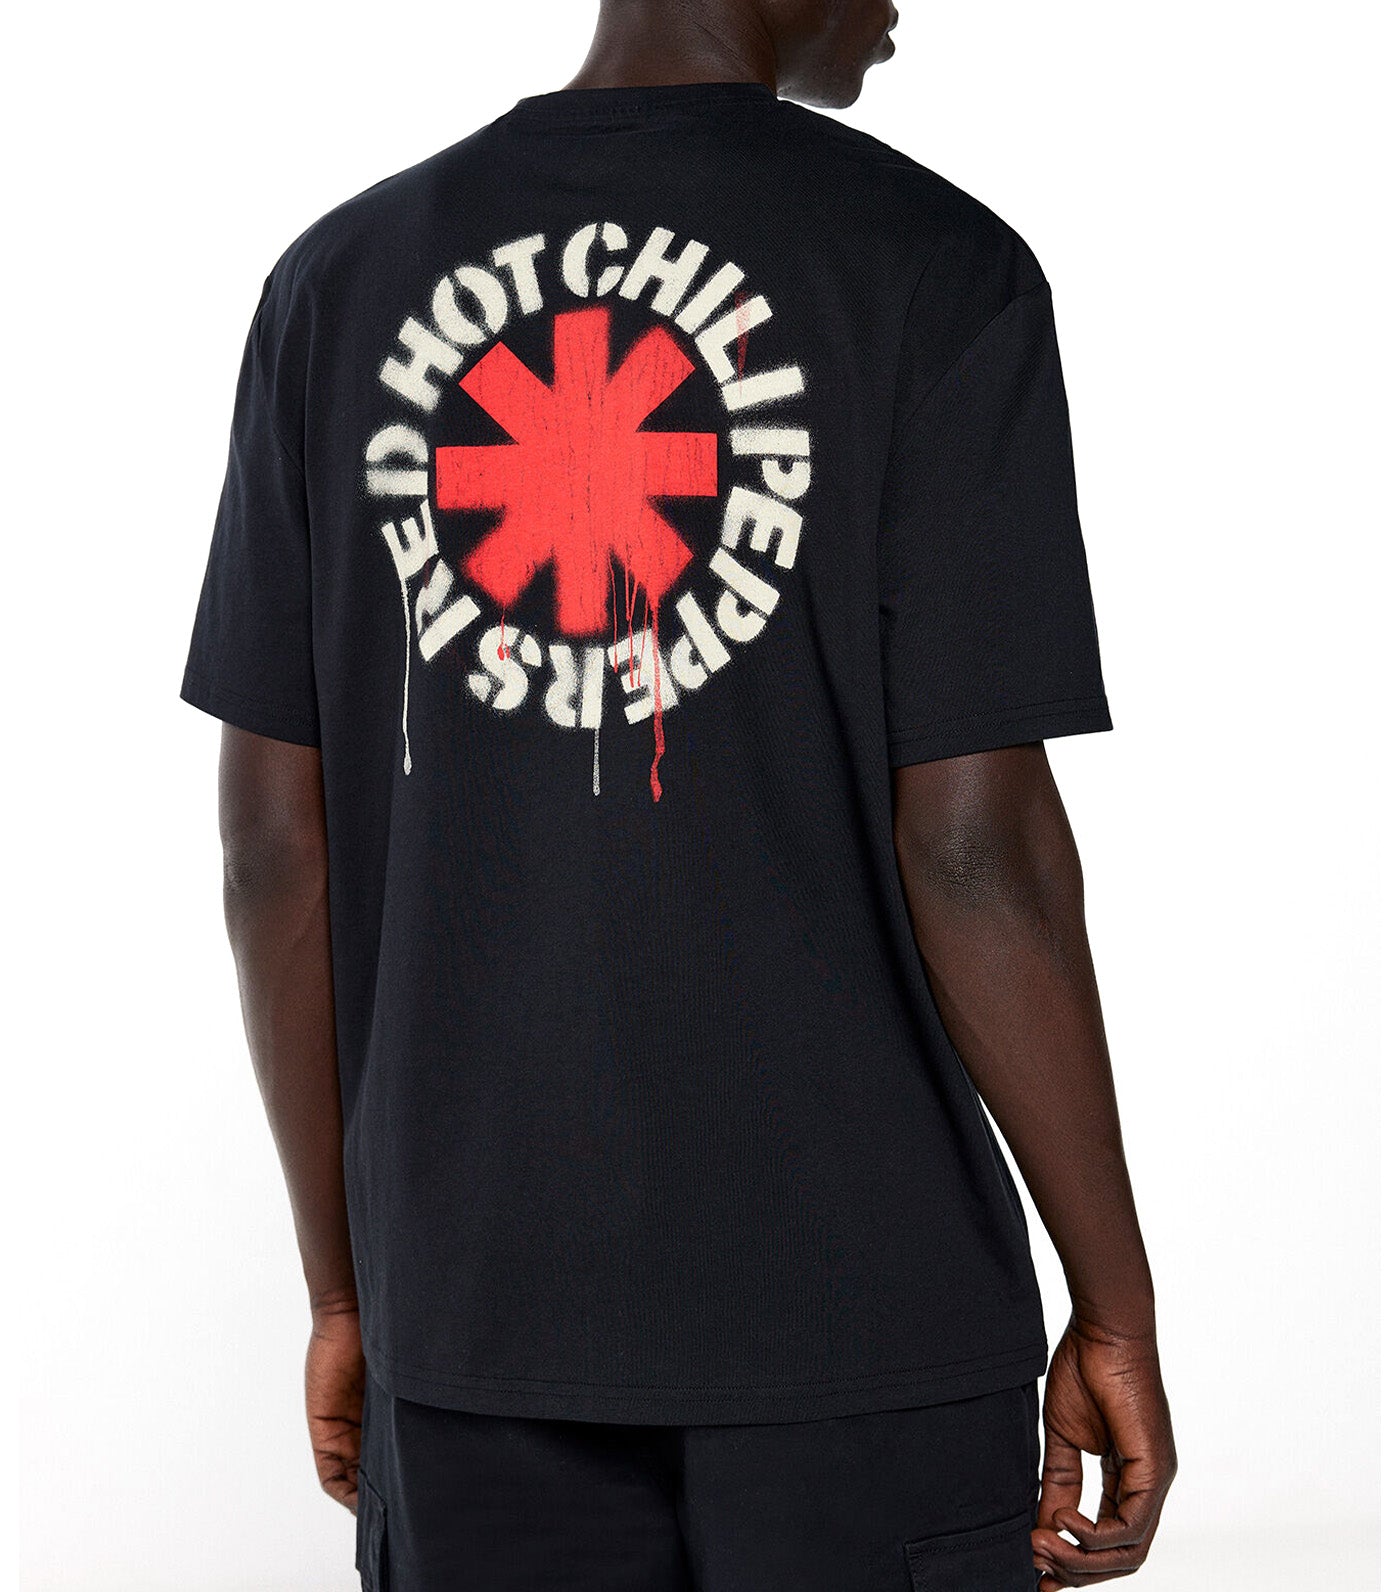 Red Hot Chilli Peppers T-Shirt Black